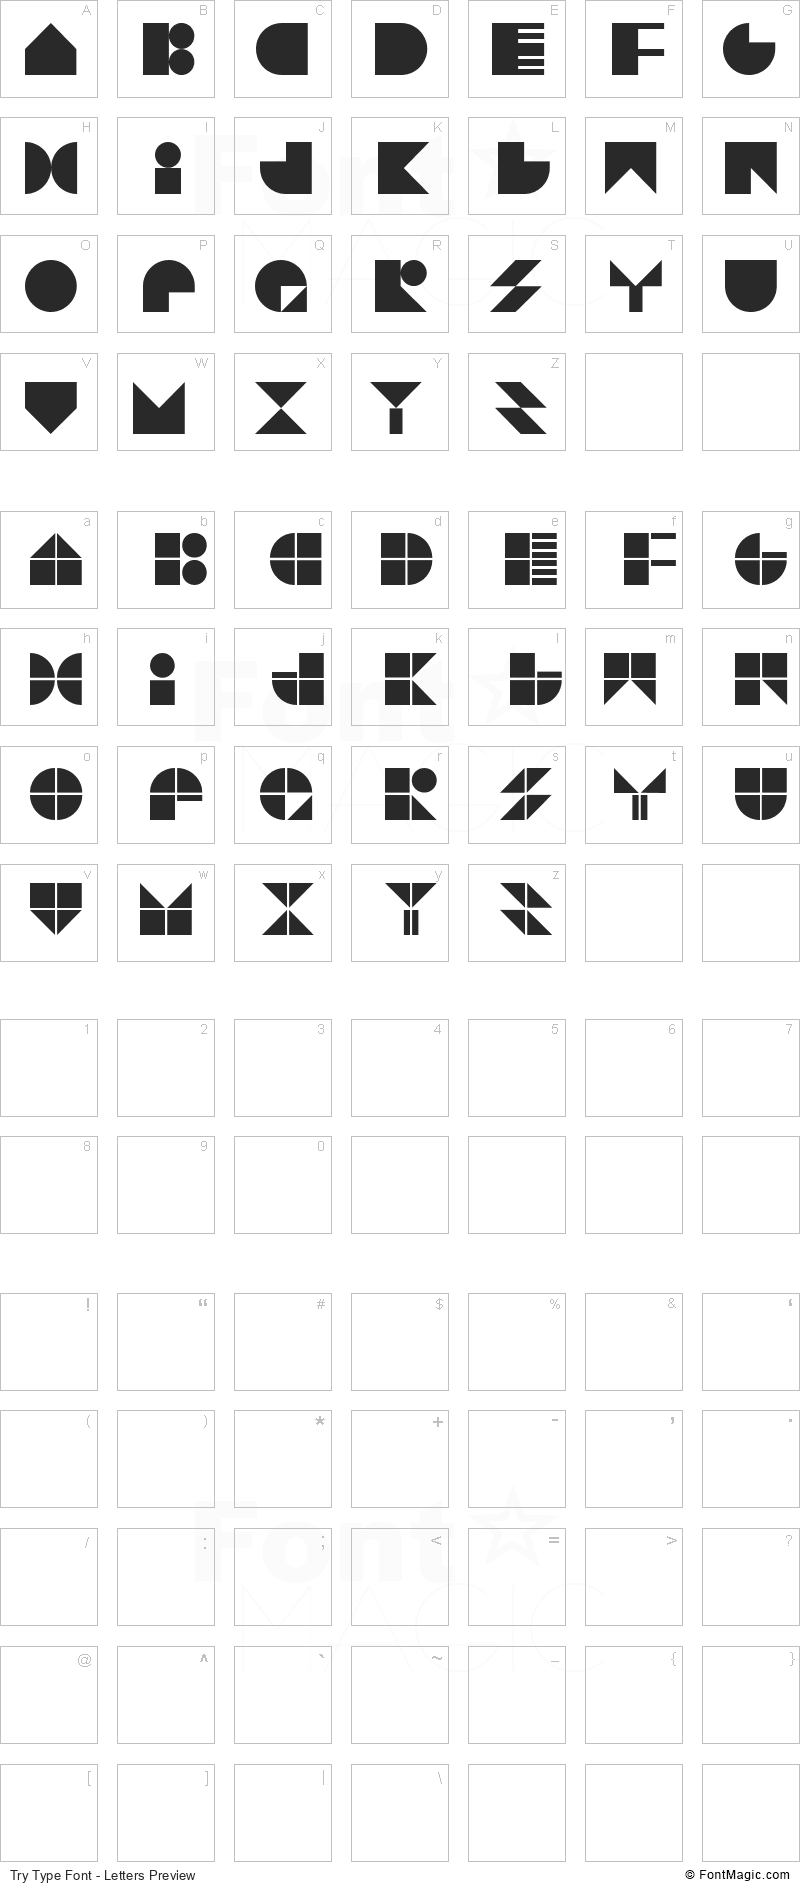 Try Type Font - All Latters Preview Chart